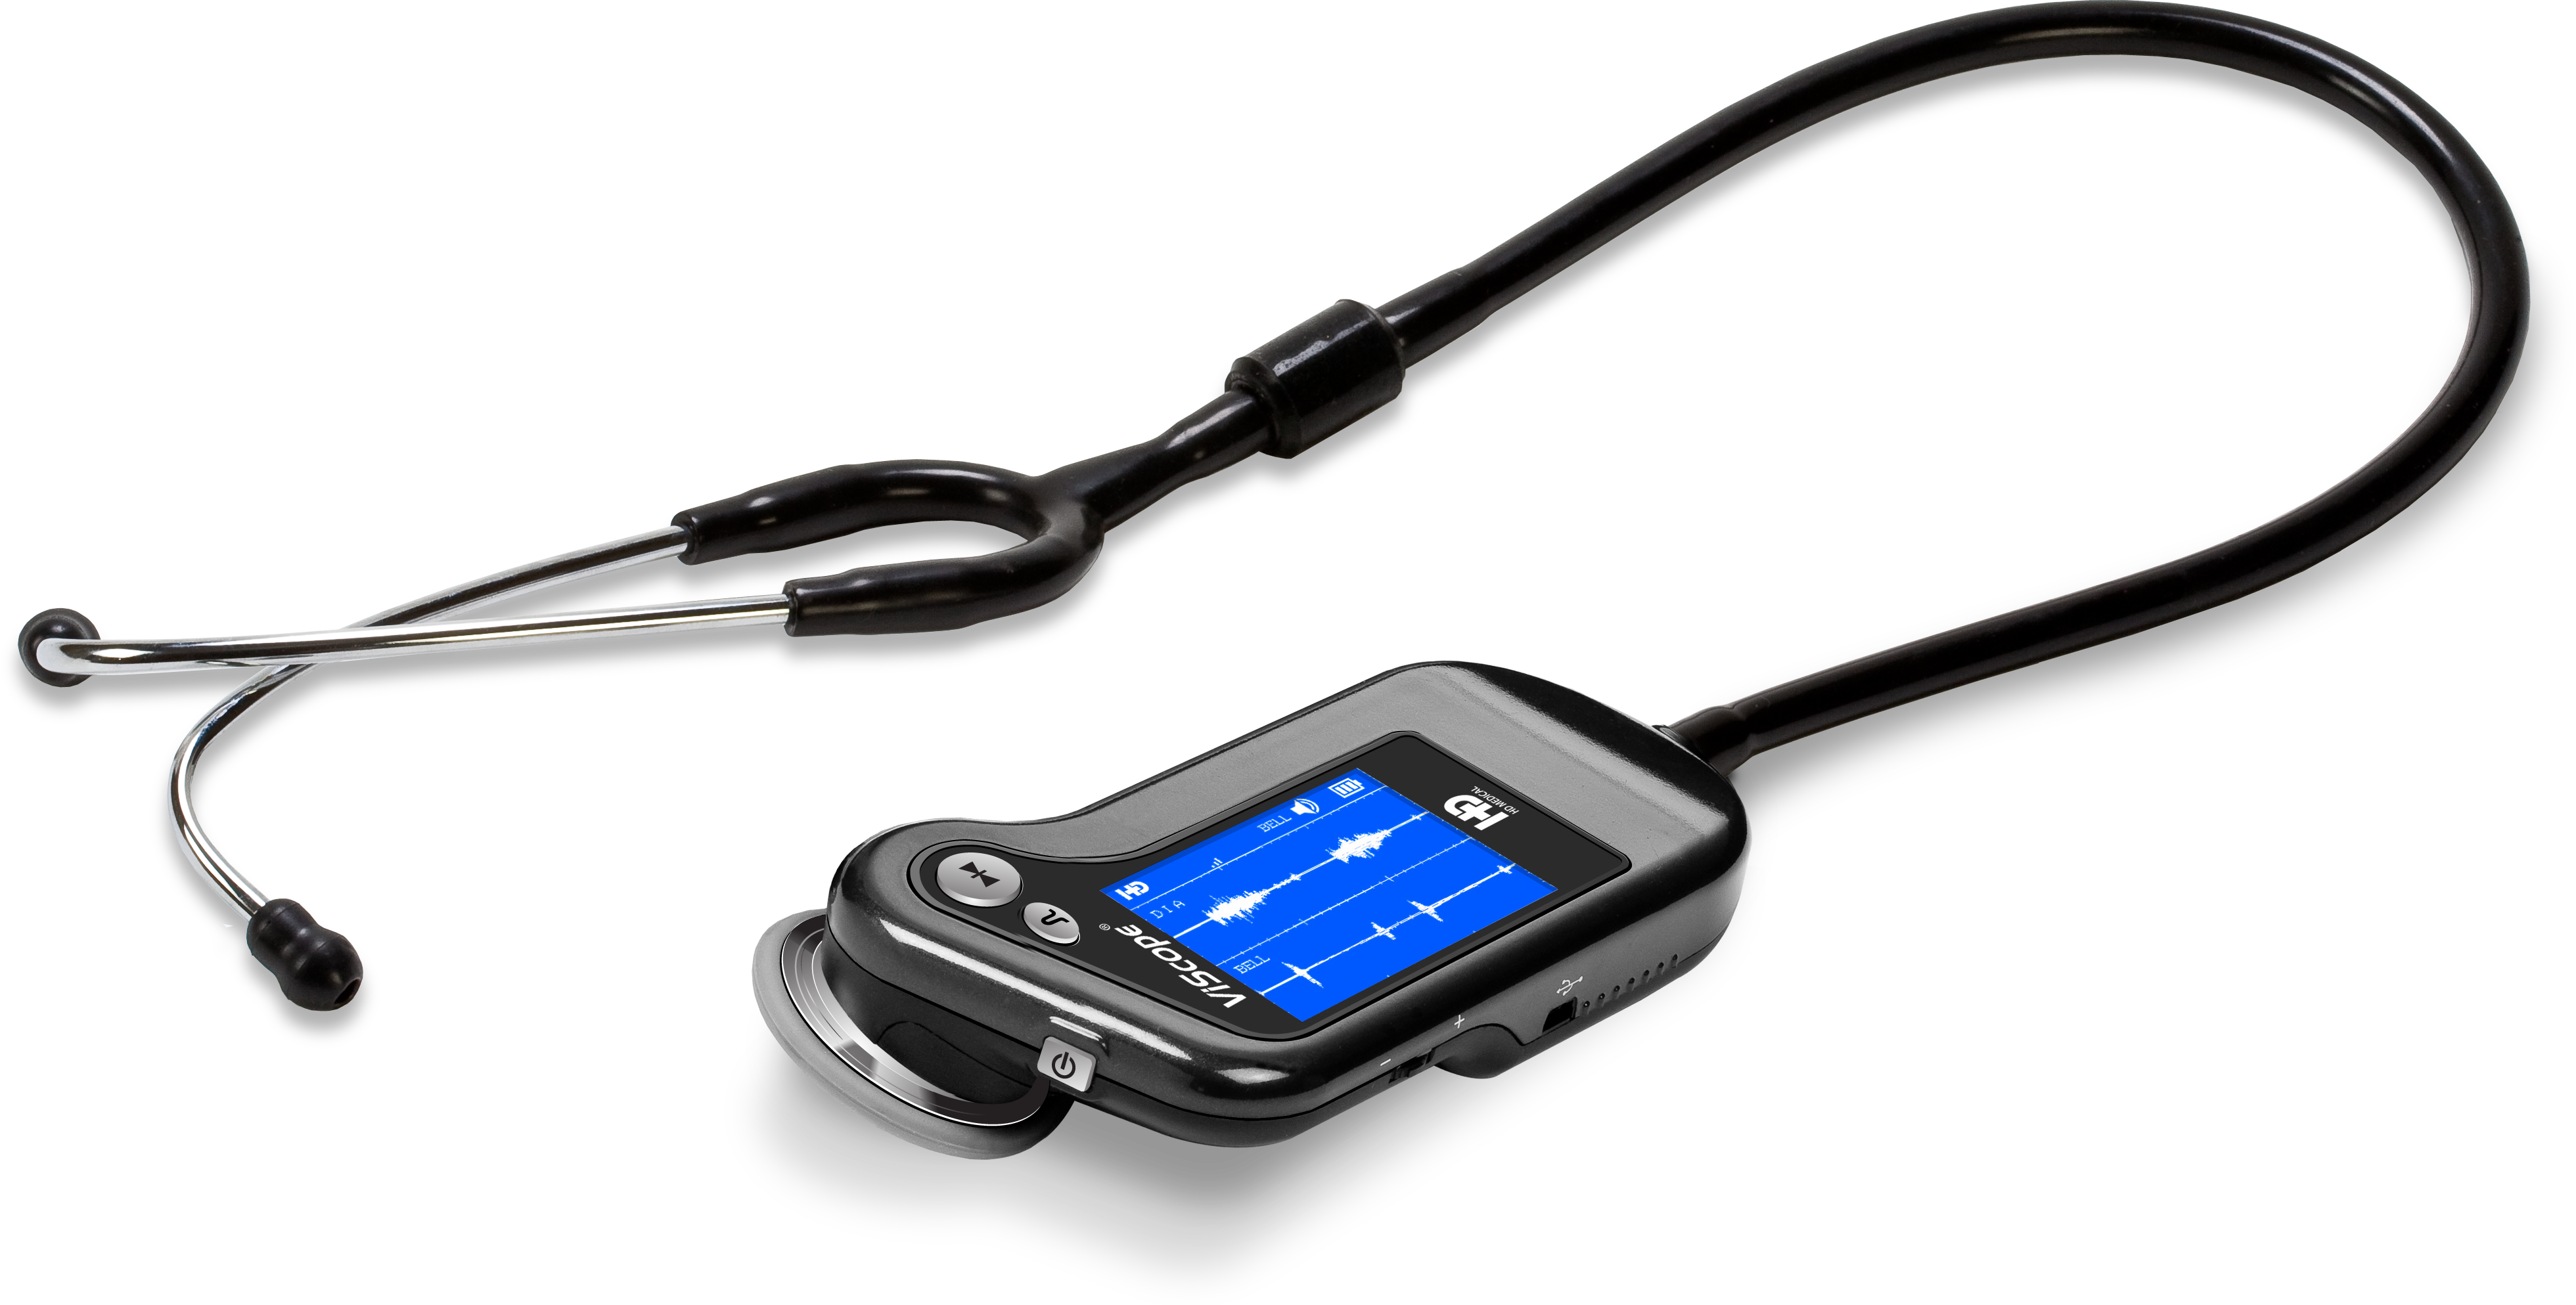 New Visual Stethoscope Demonstrated at HIMSS 2015 | DAIC